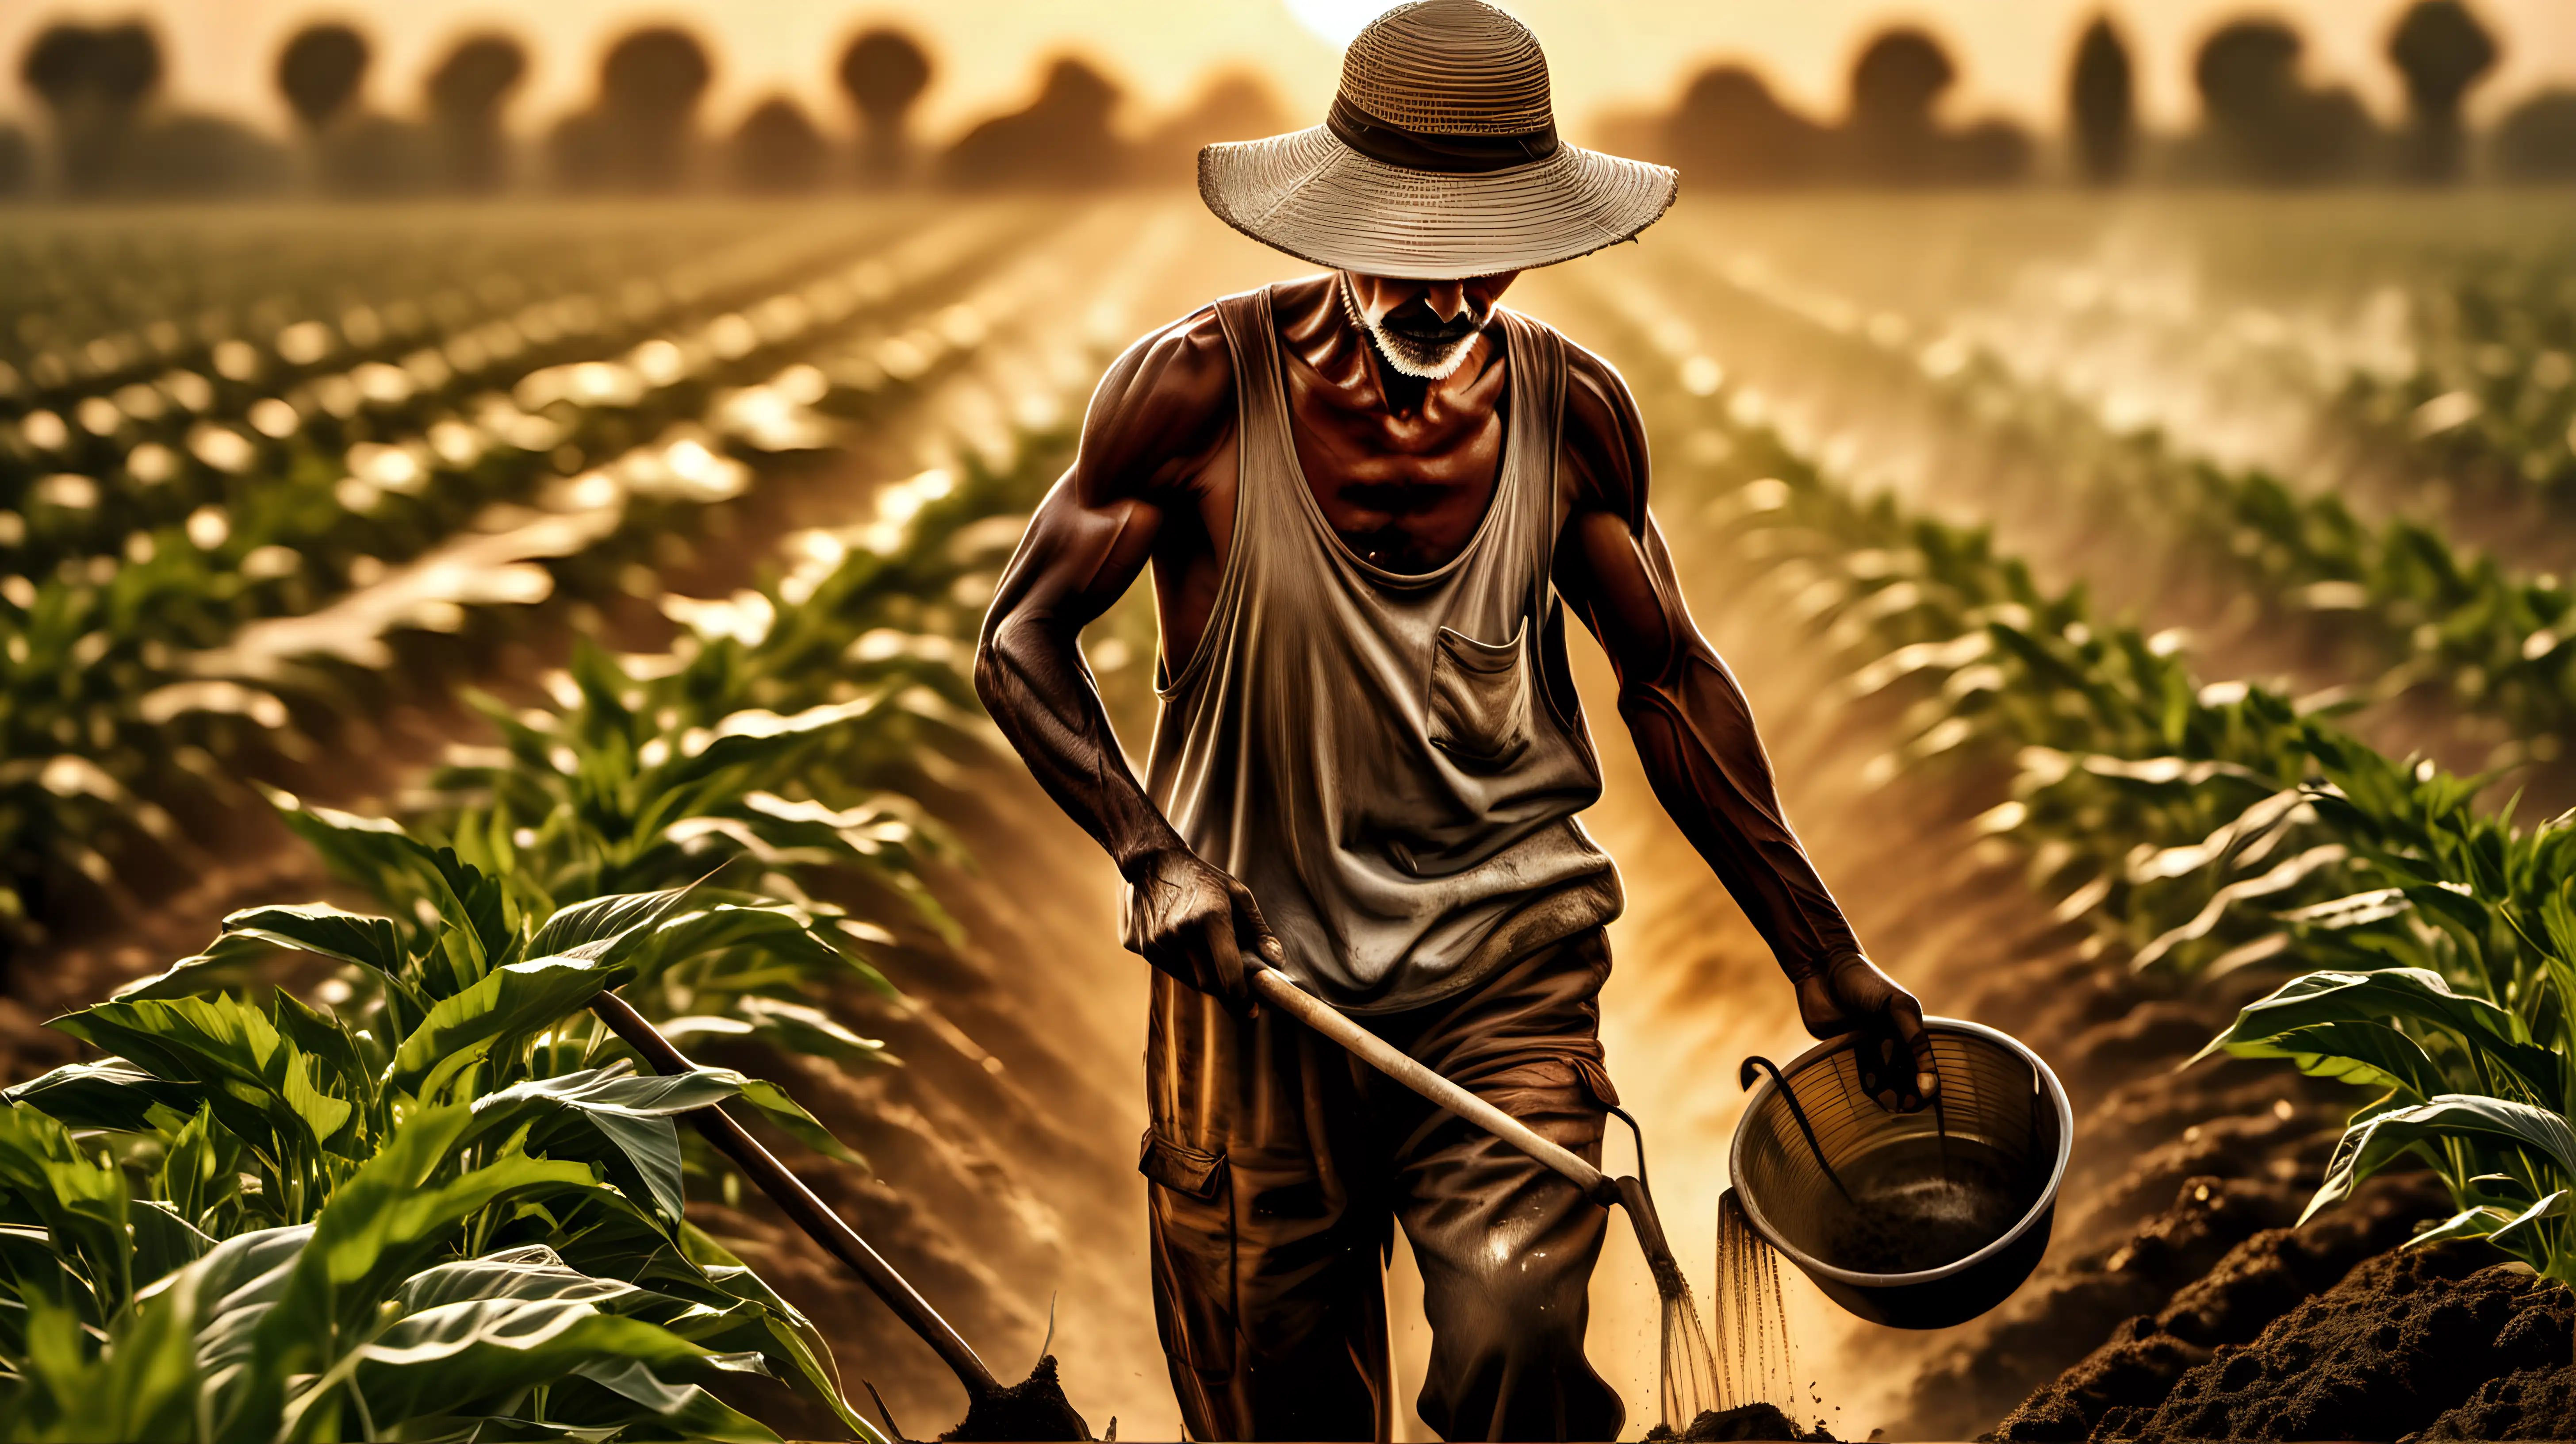 Depict a farmer working in the fields under the scorching sun, sweat-soaked and surrounded by crops, conveying the physical labor and resilience required in agriculture.